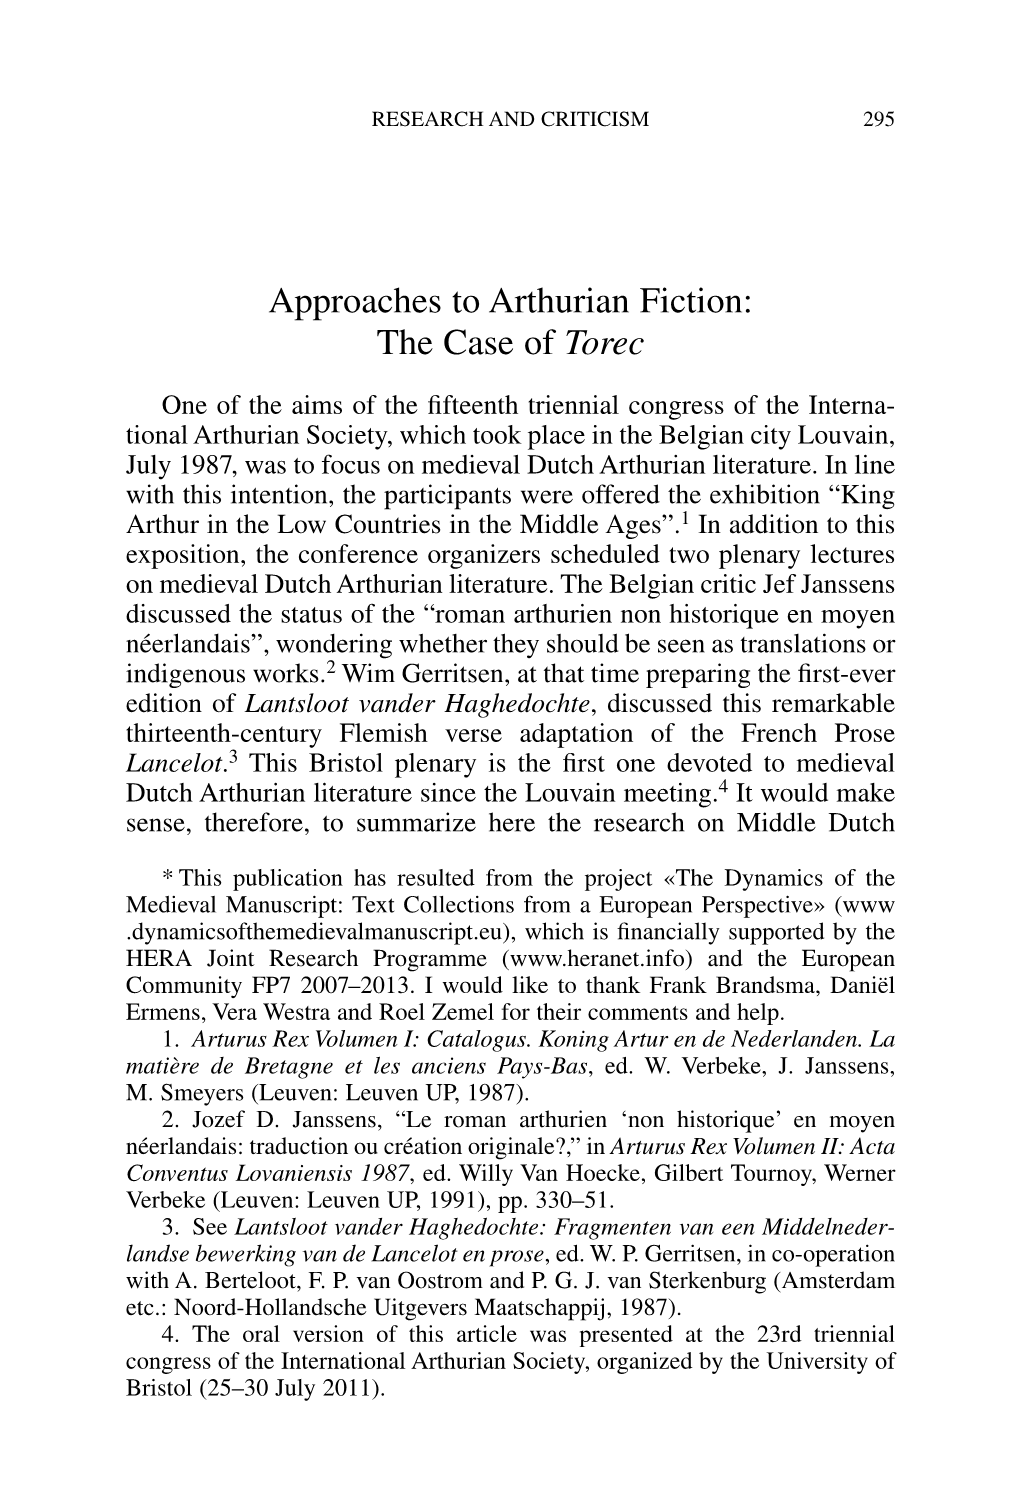 Approaches to Arthurian Fiction: the Case of Torec